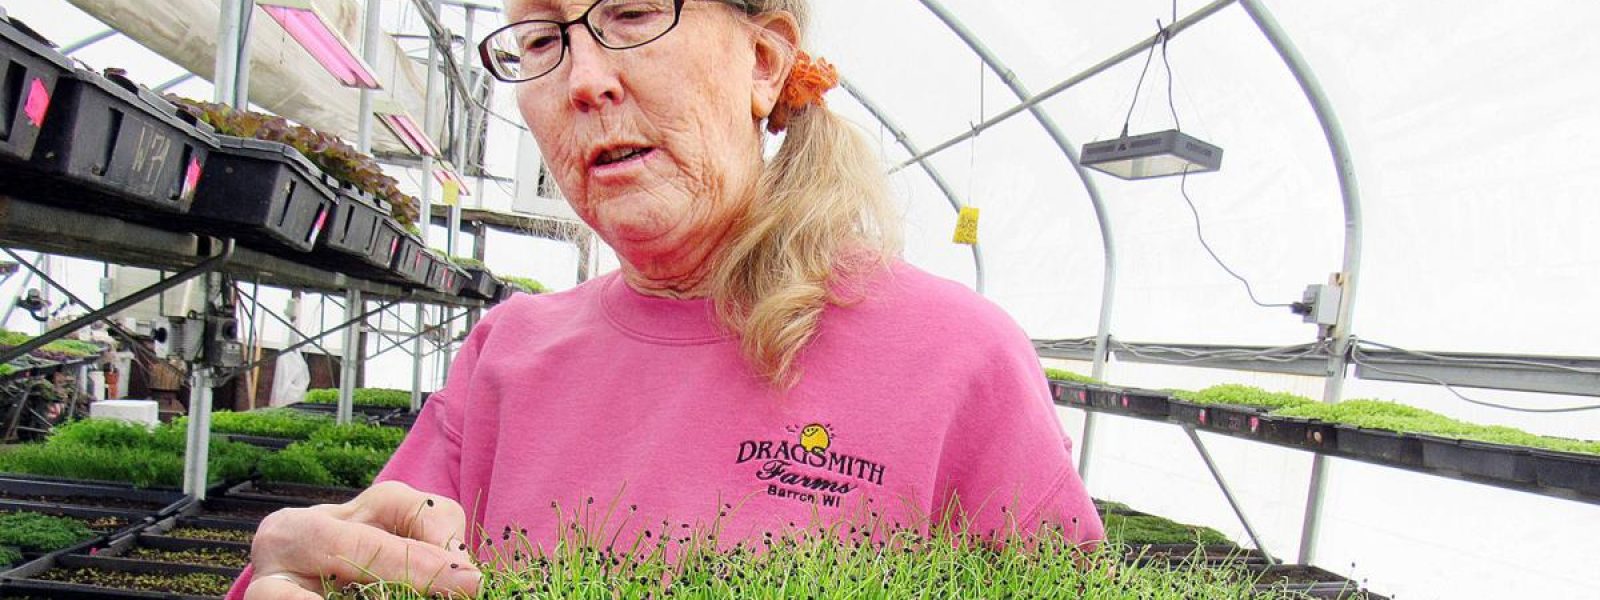 A person with a pink shirt attending to plants in a greenhouse